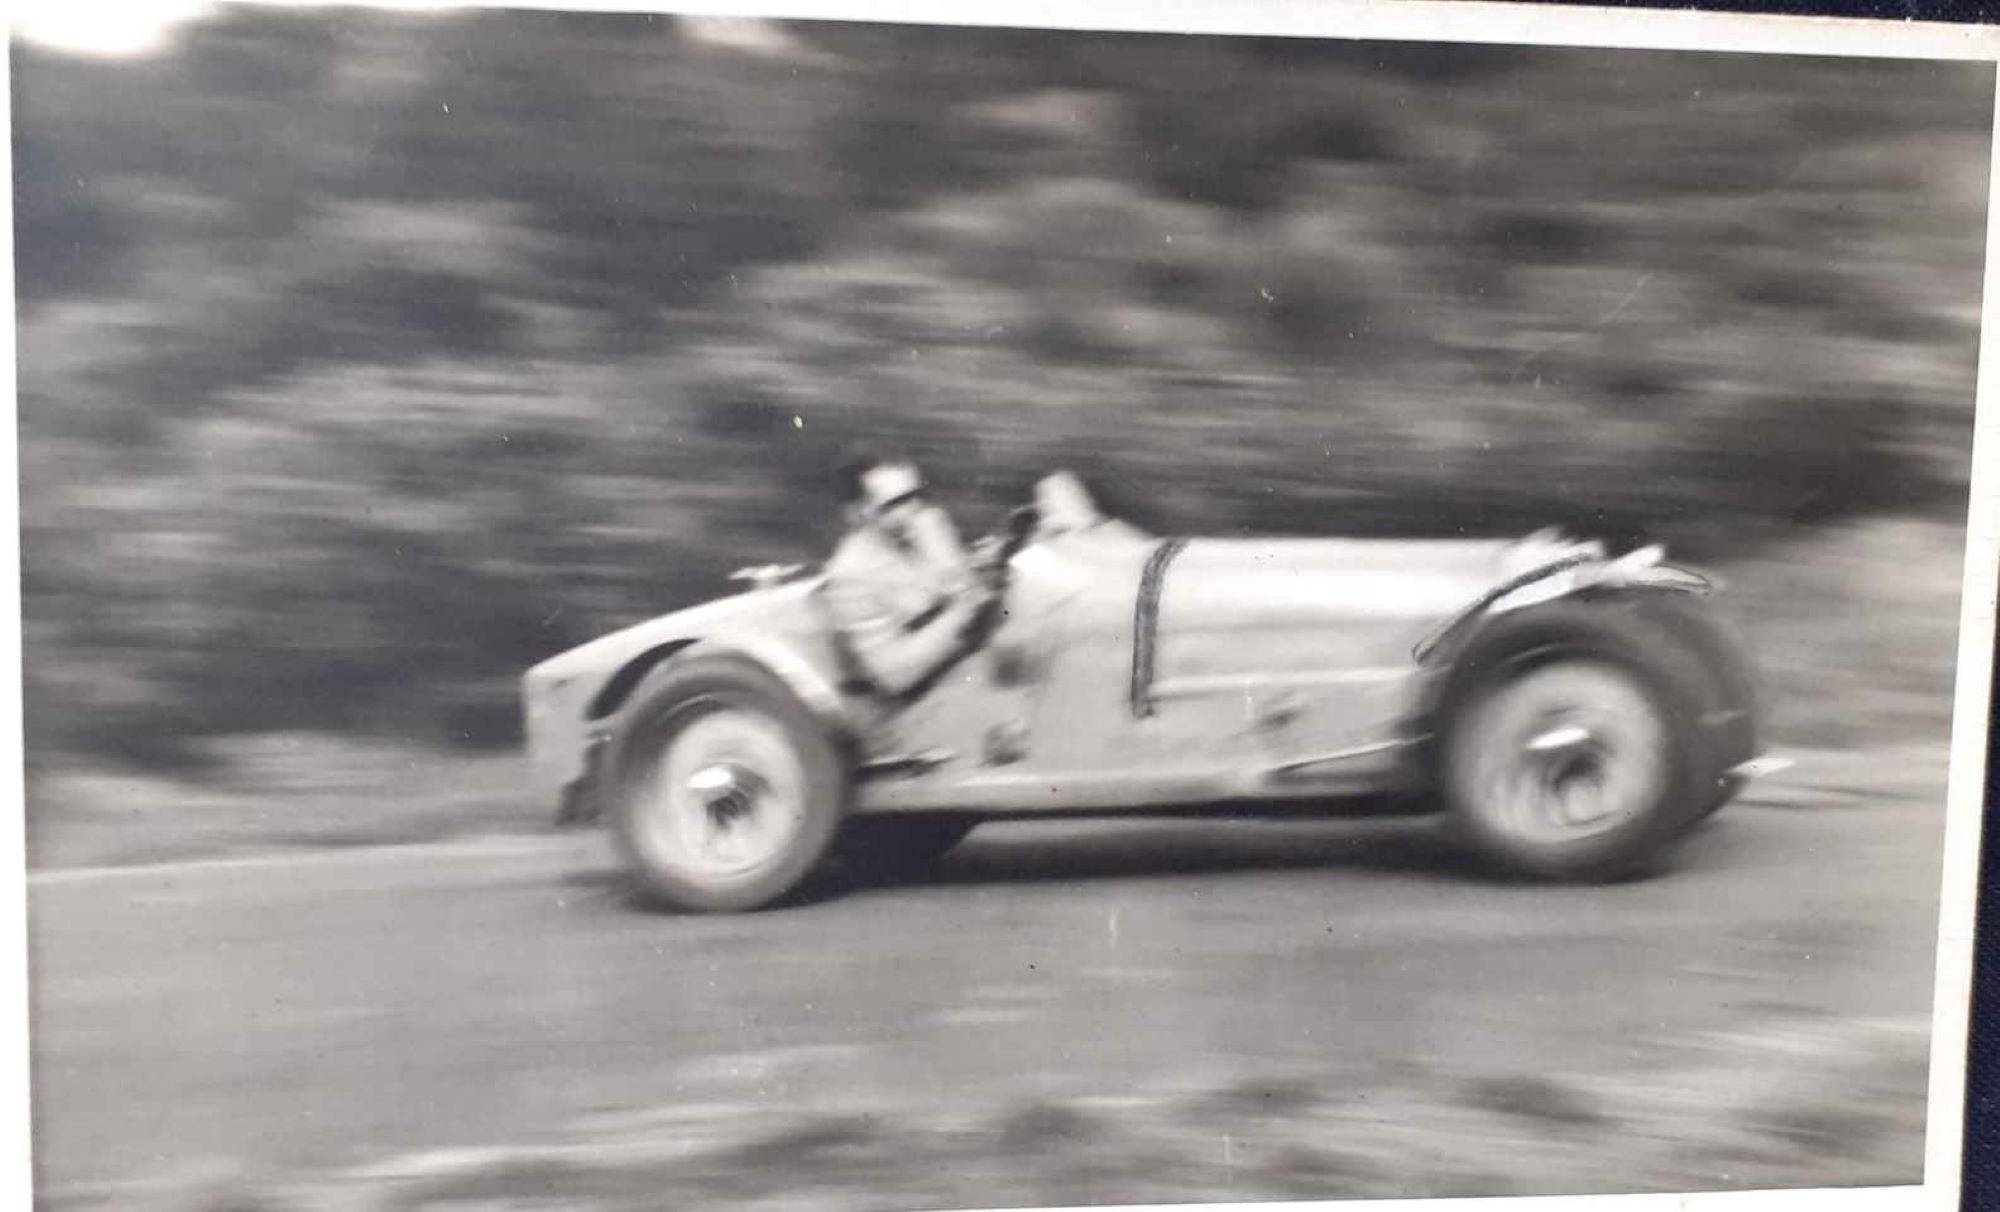 Name:  NSCC 1950 #0116 Bugatti T35 at speed - light colour 1950's - image Graeme Wells arch Anthony Wel.jpg
Views: 271
Size:  158.1 KB